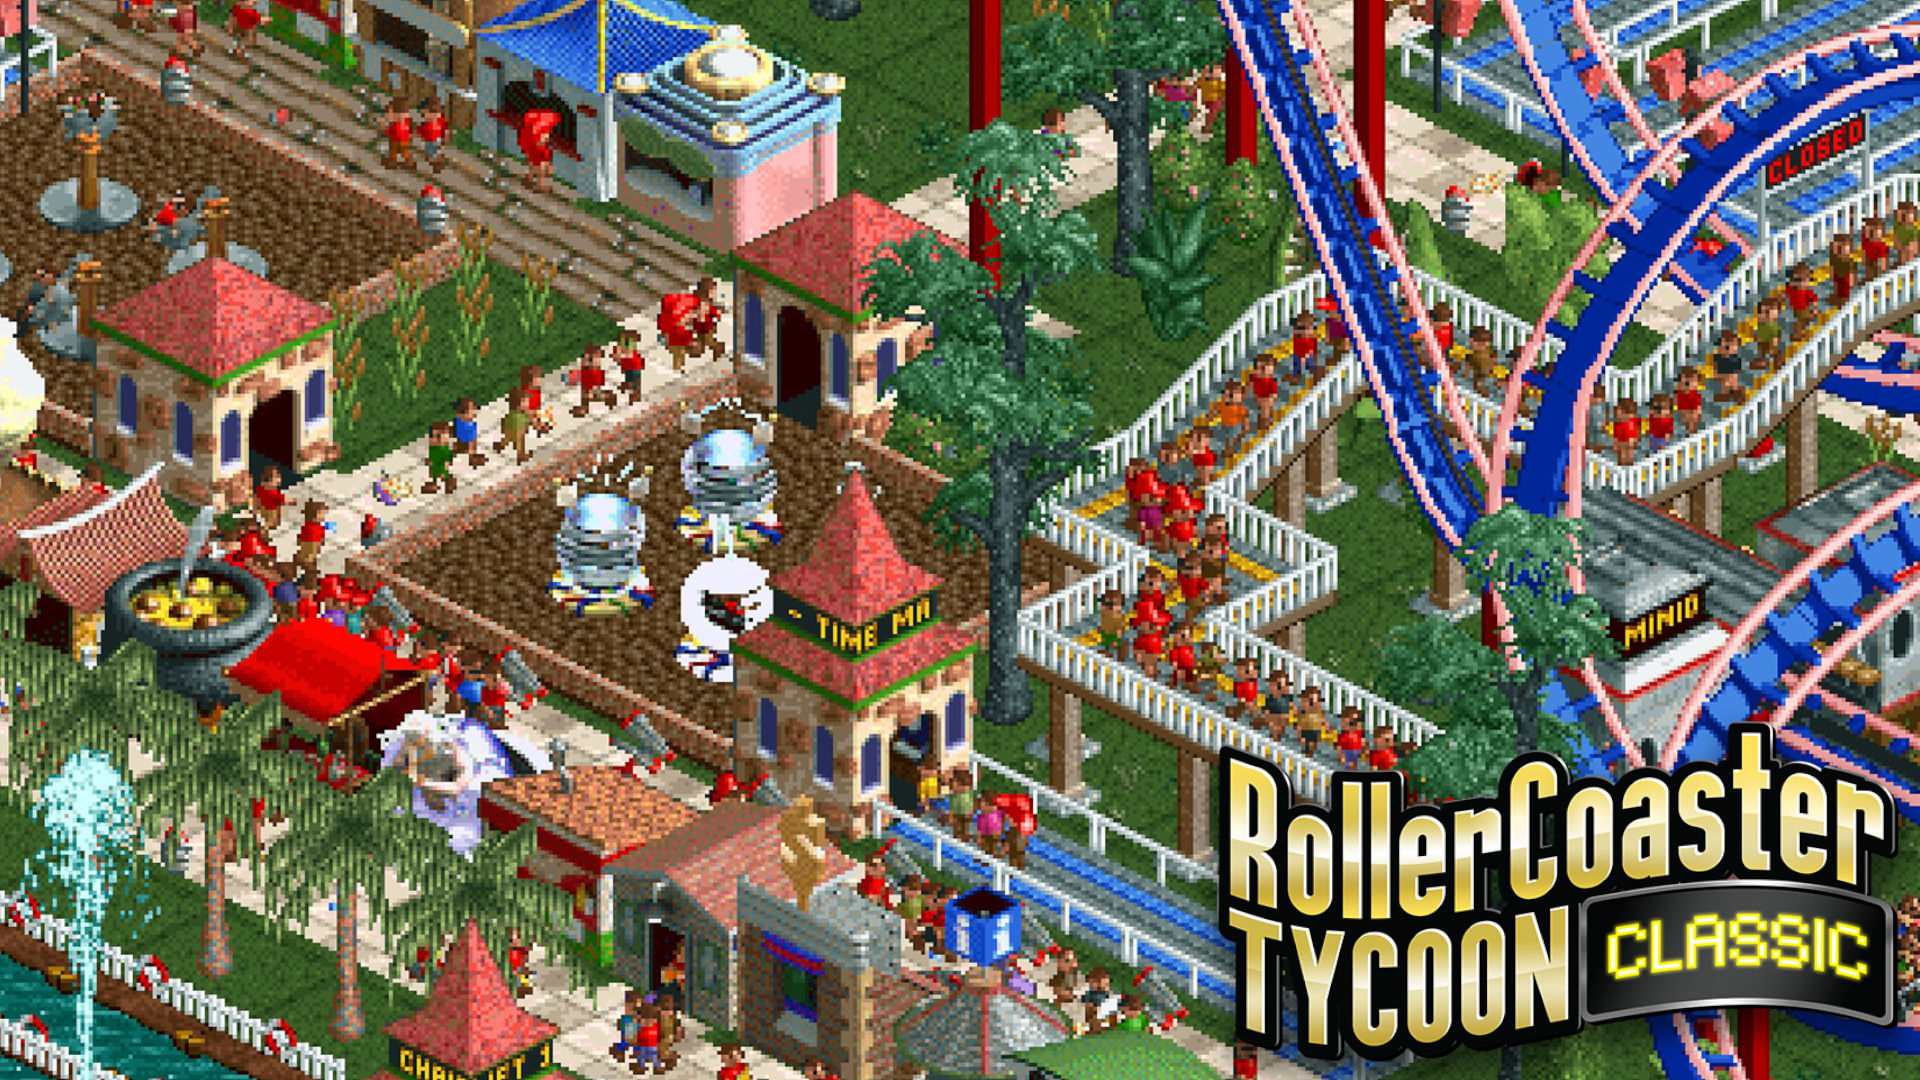 RollerCoaster Tycoon World release and second beta weekend delayed